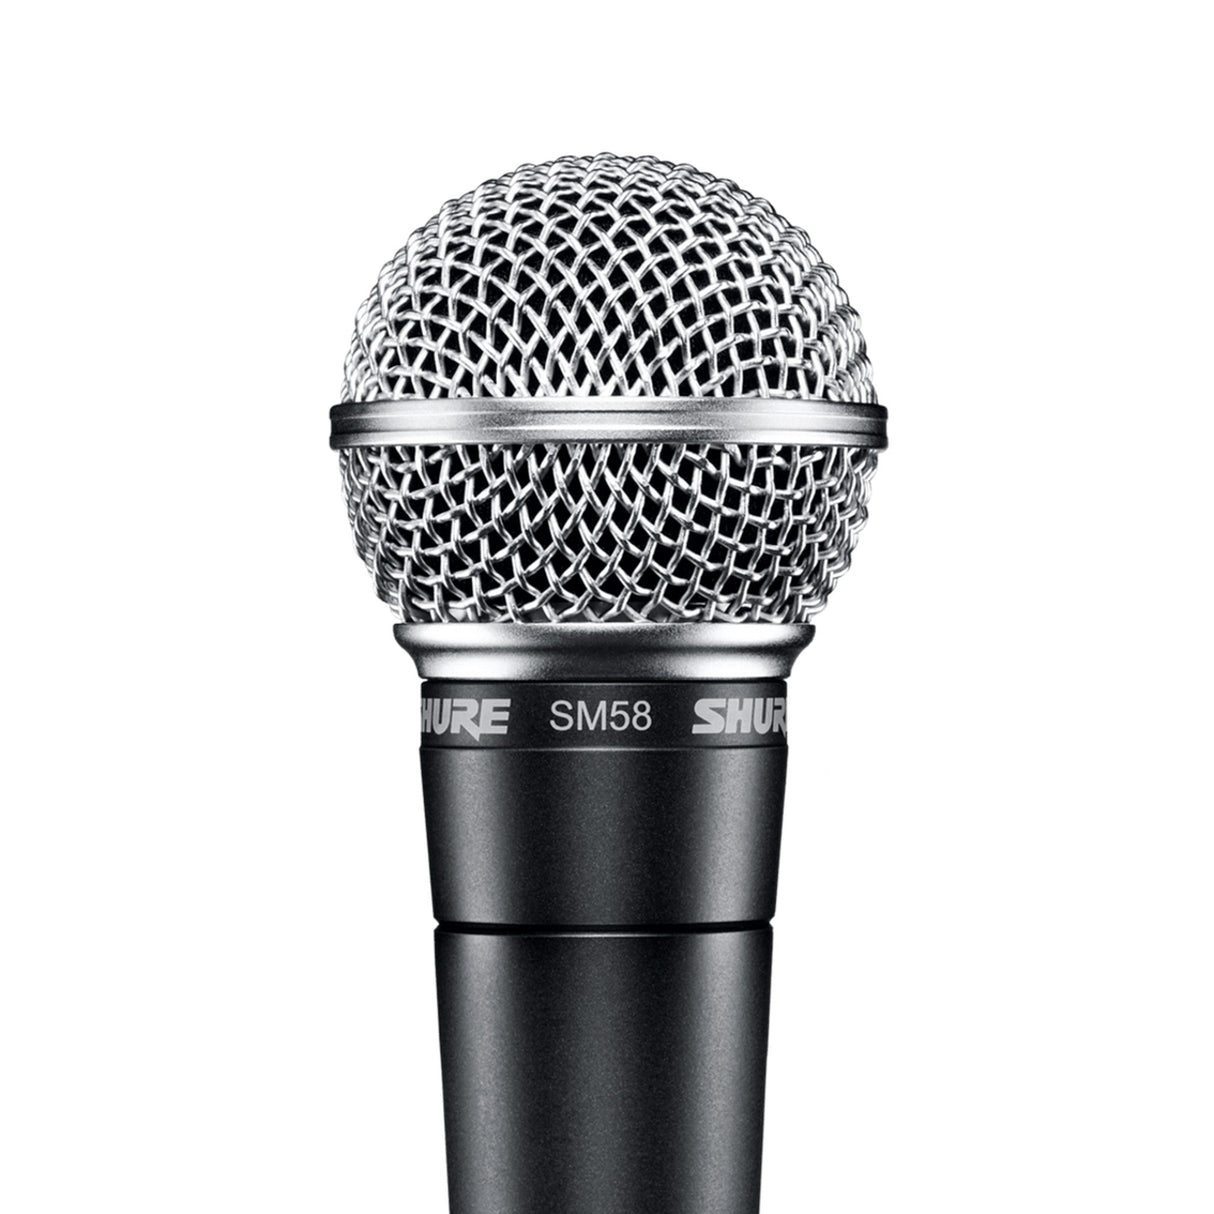 Shure SM58 Cardioid Dynamic Live Microphone without Cable (Used)